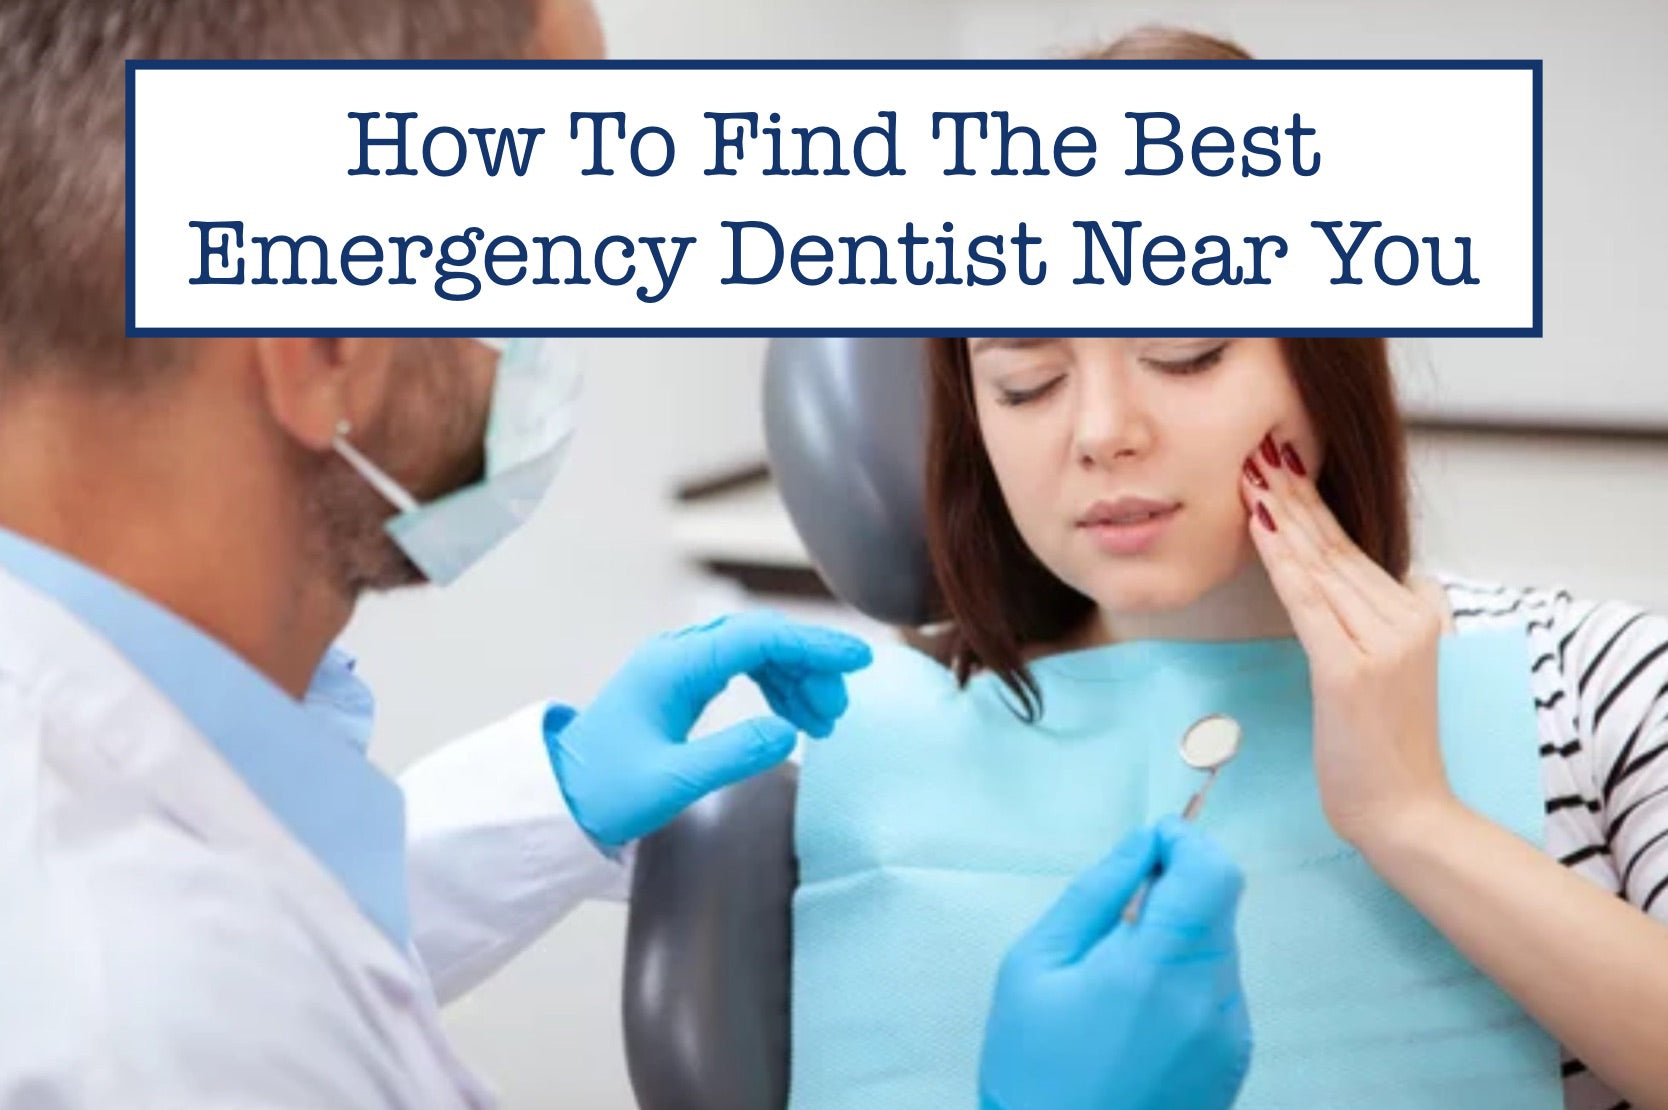 How To Find The Best Emergency Dentist Near You